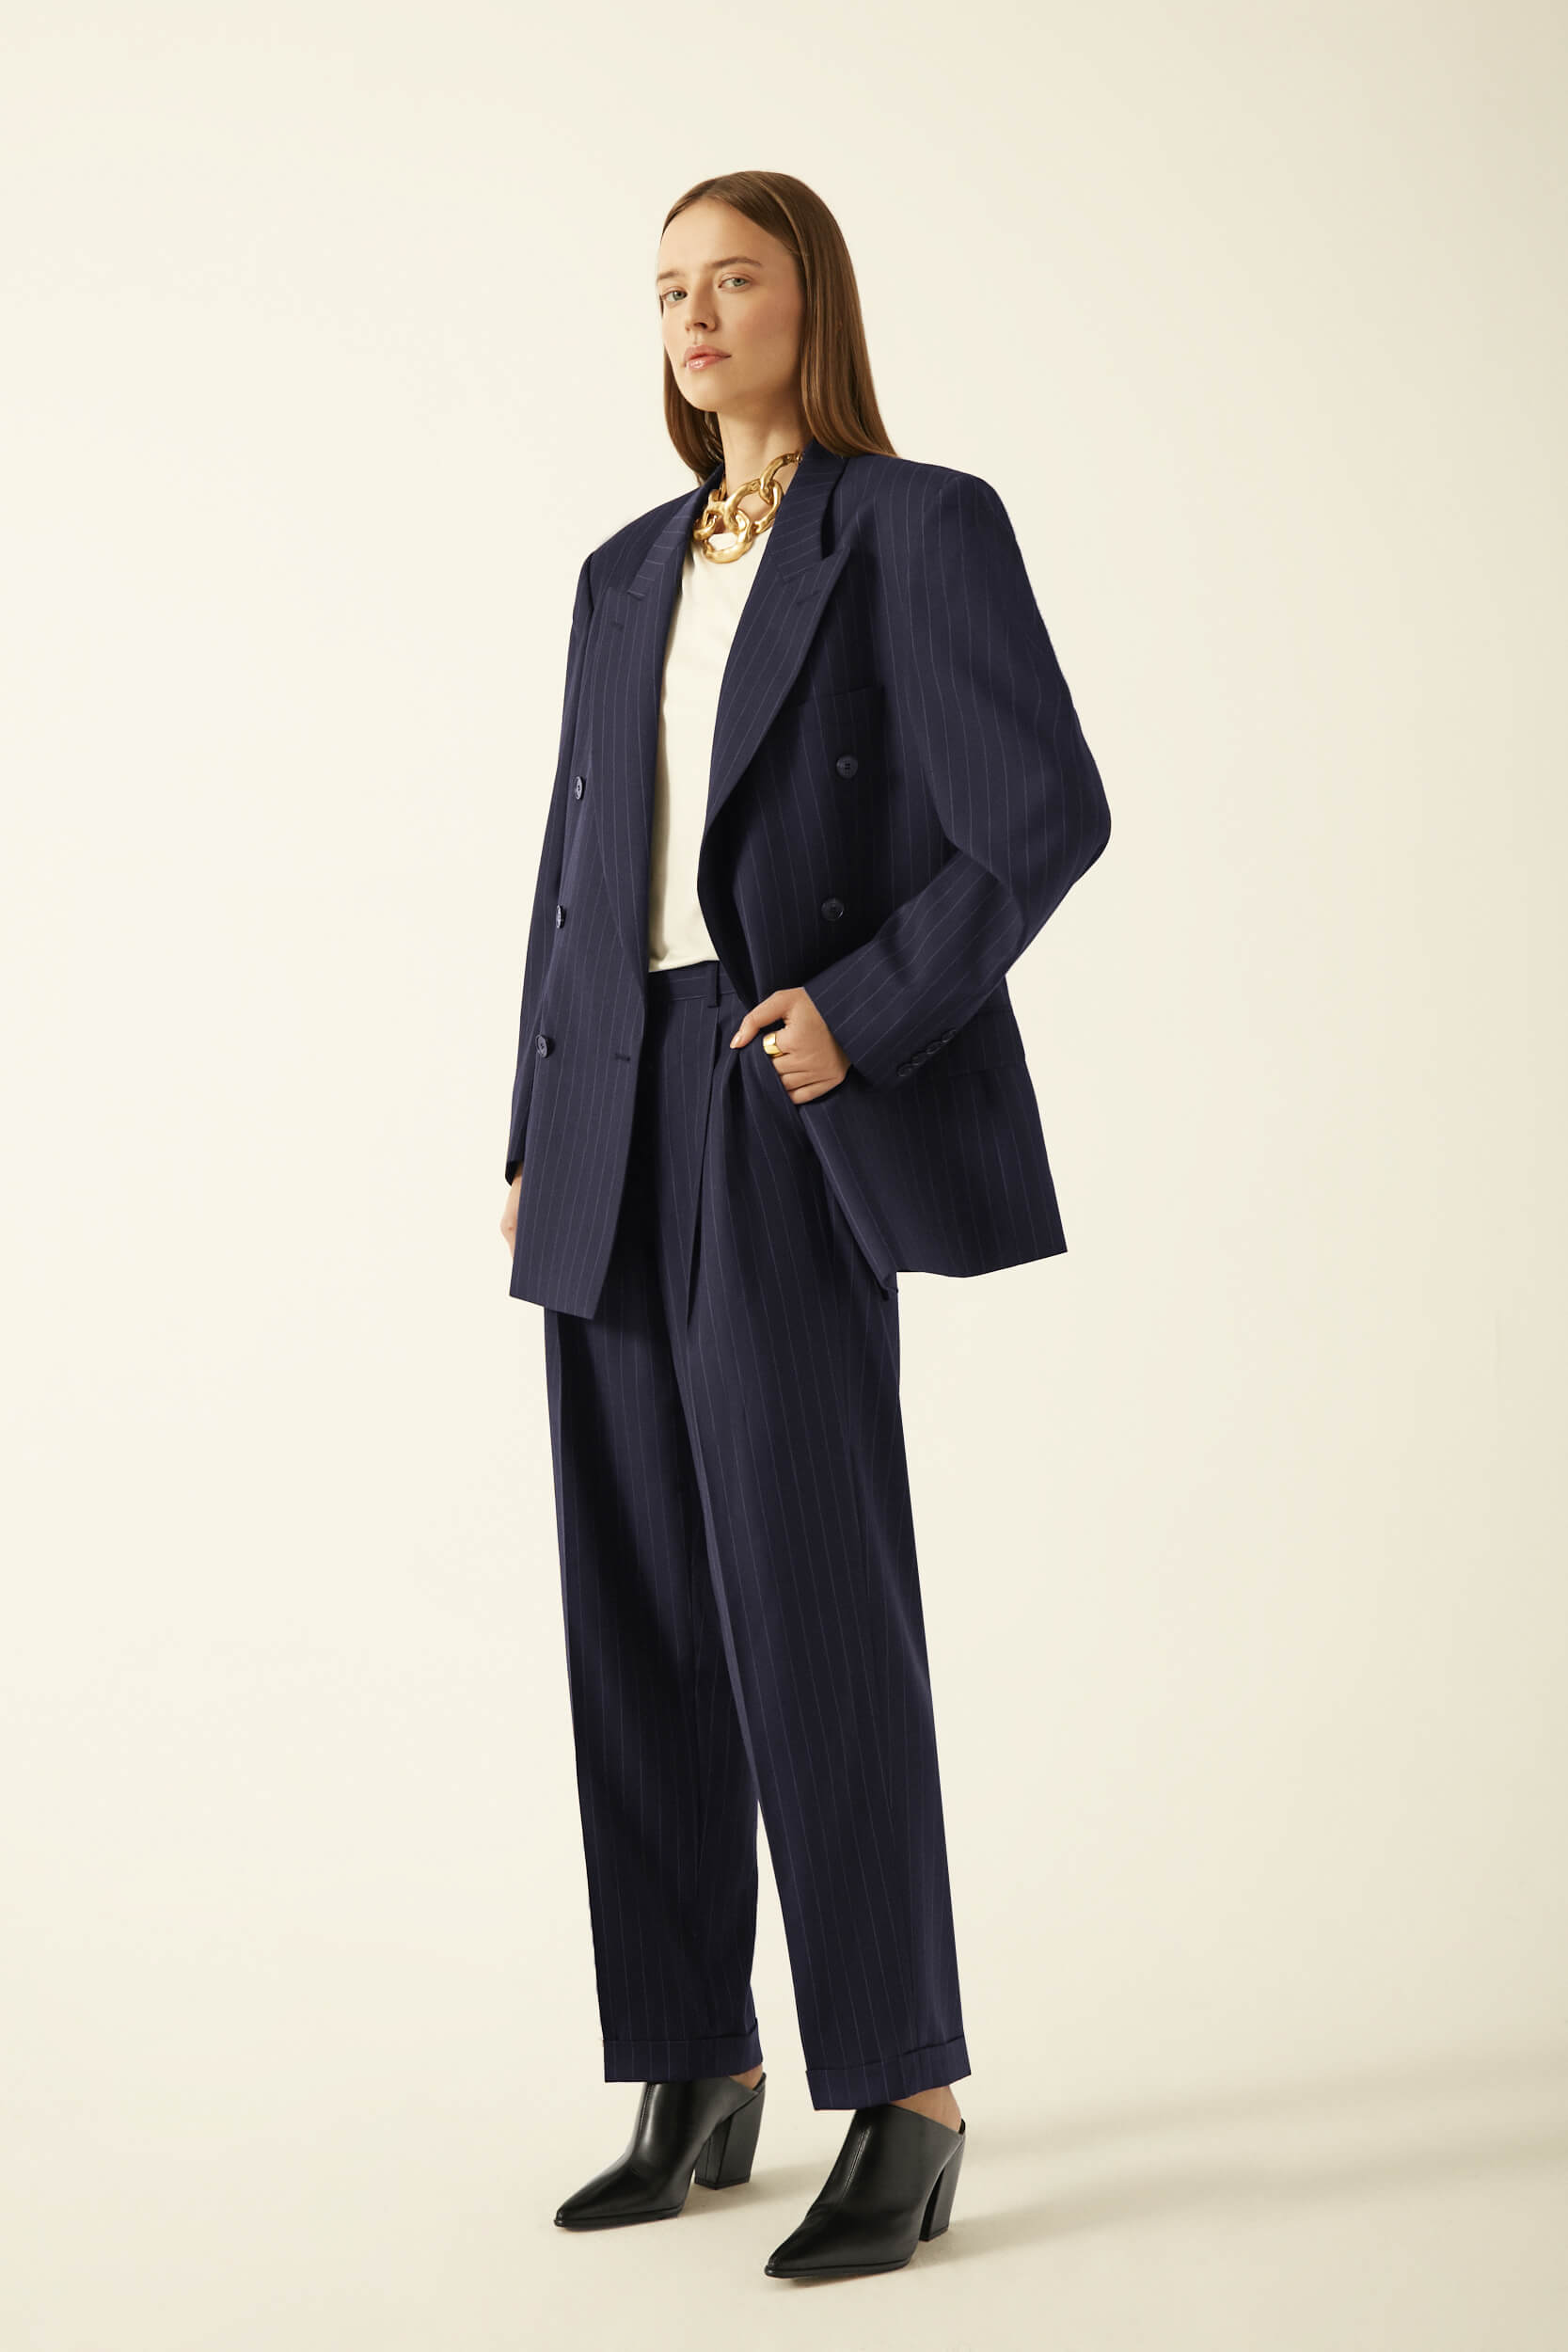 WOOL AND SILK SUIT IN NAVY